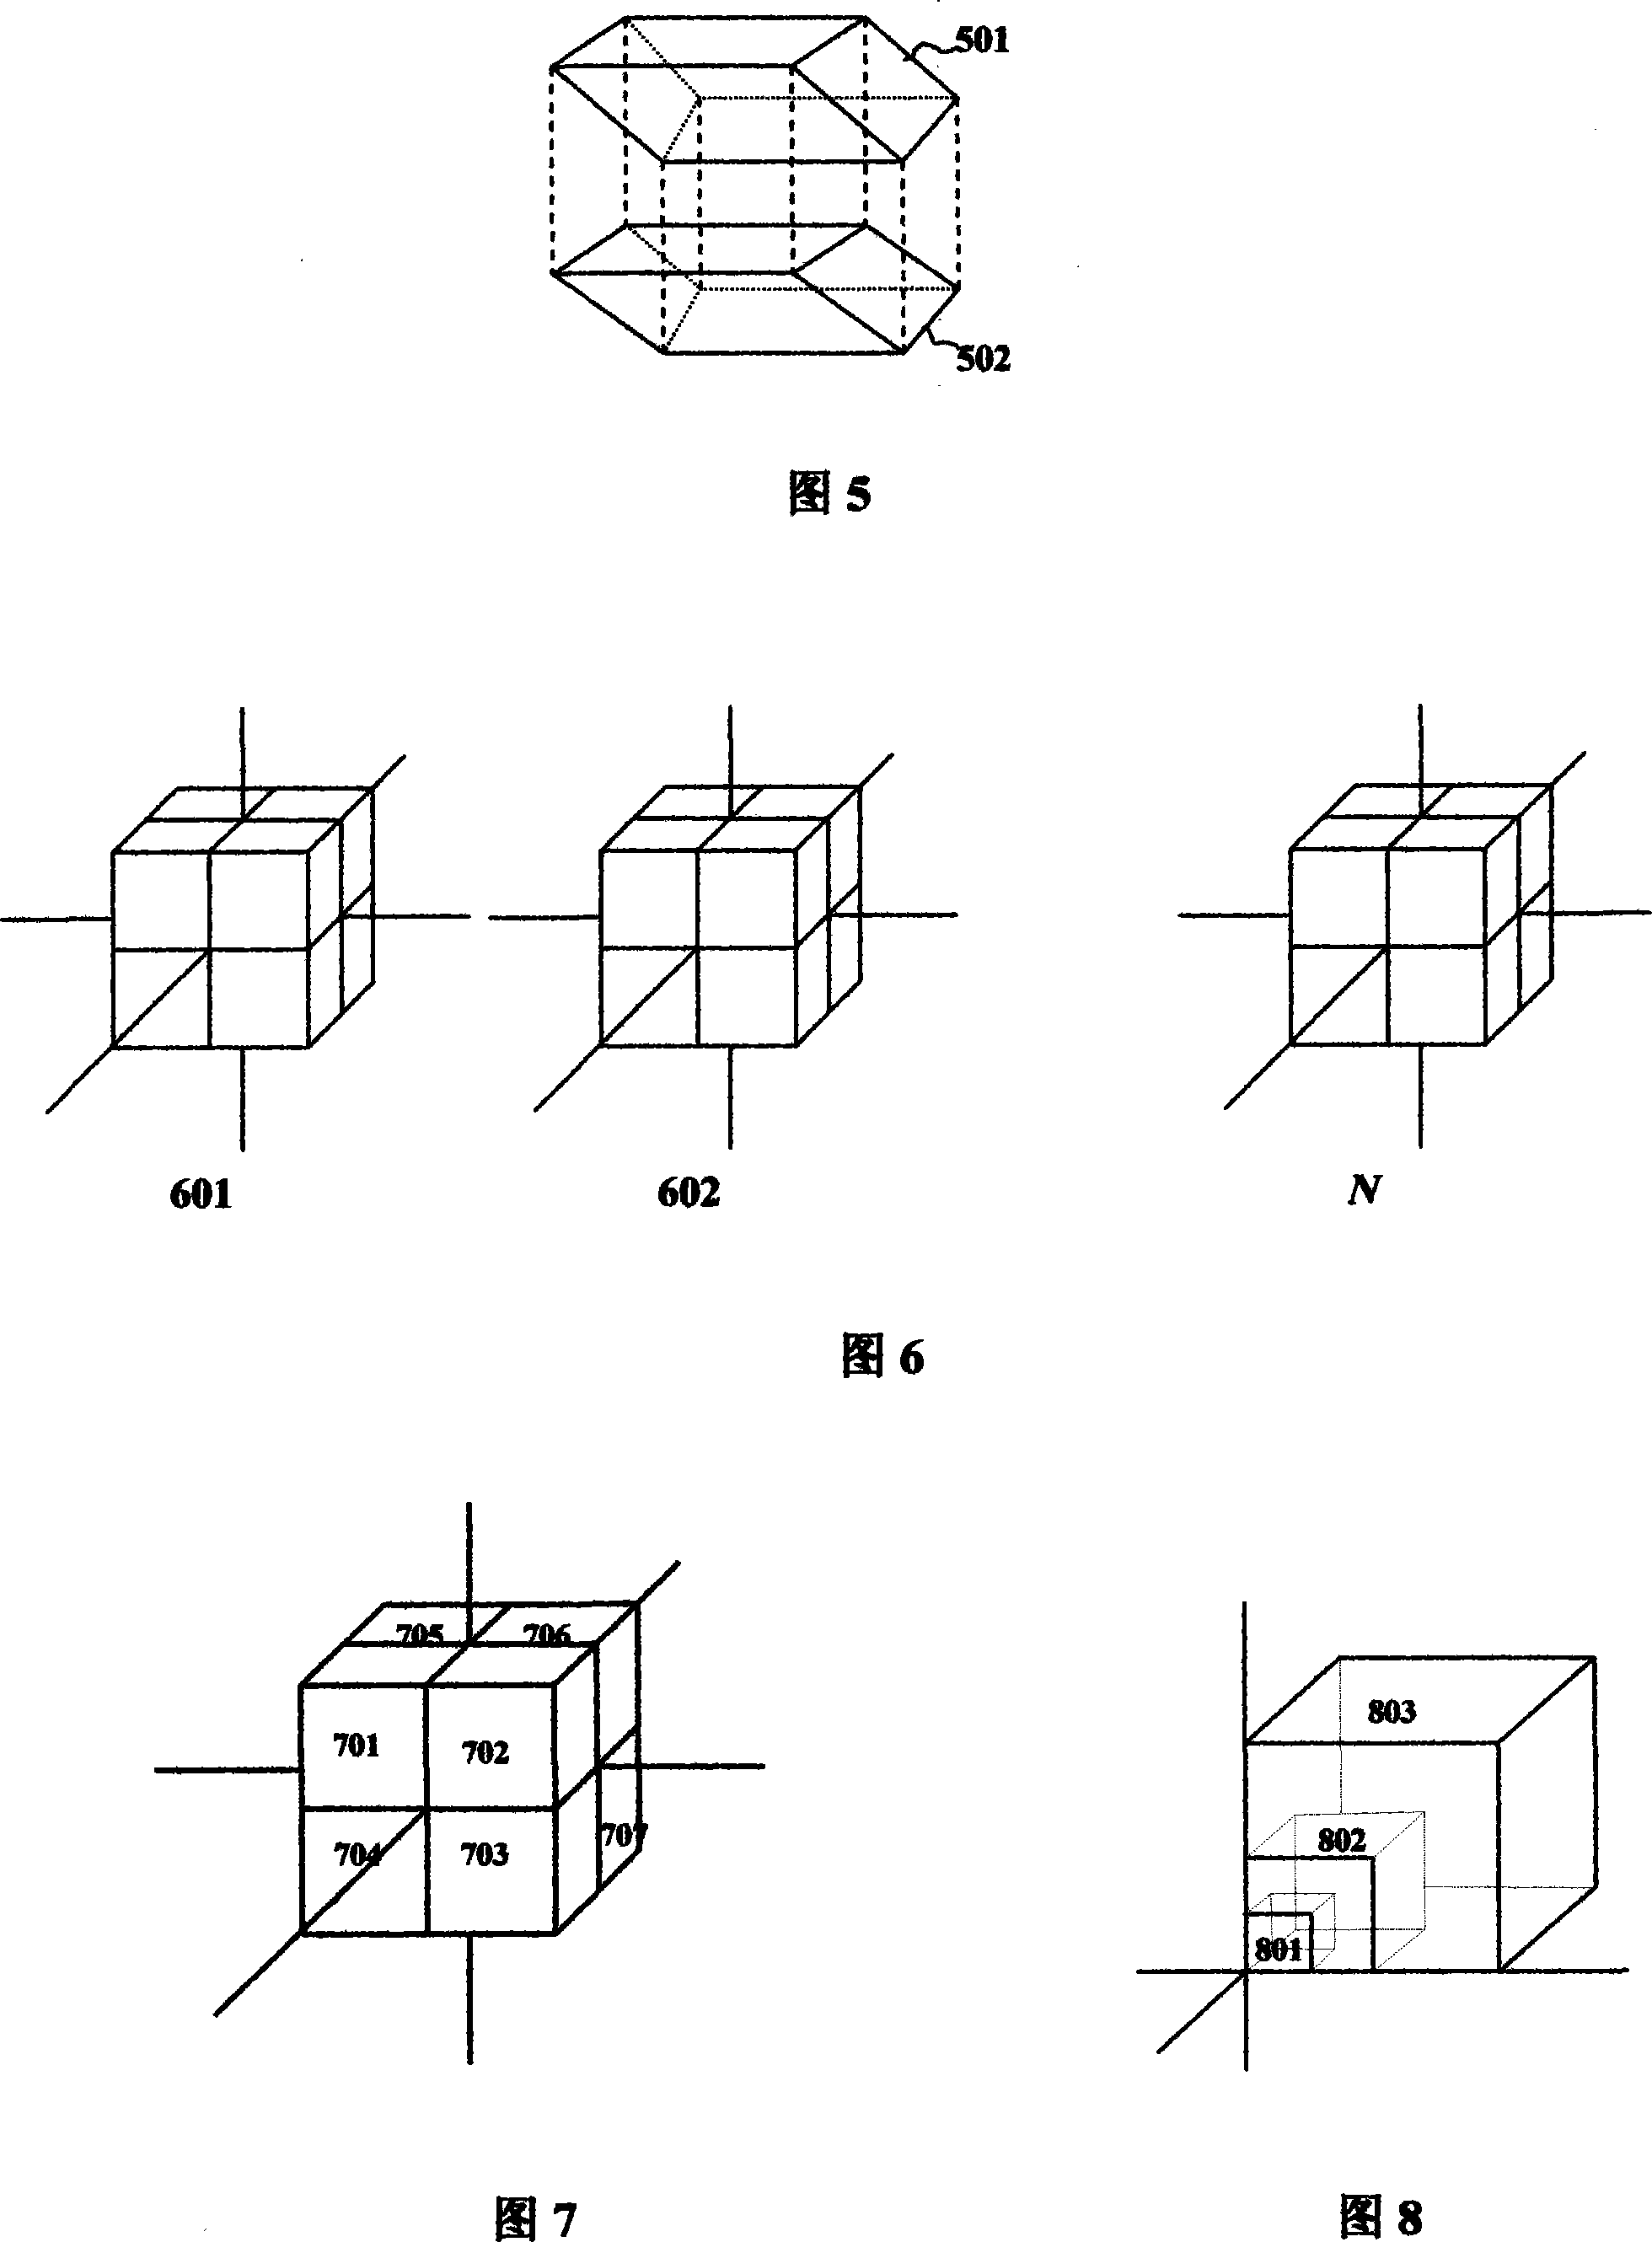 Method, device and system for constructing multi-dimensional address